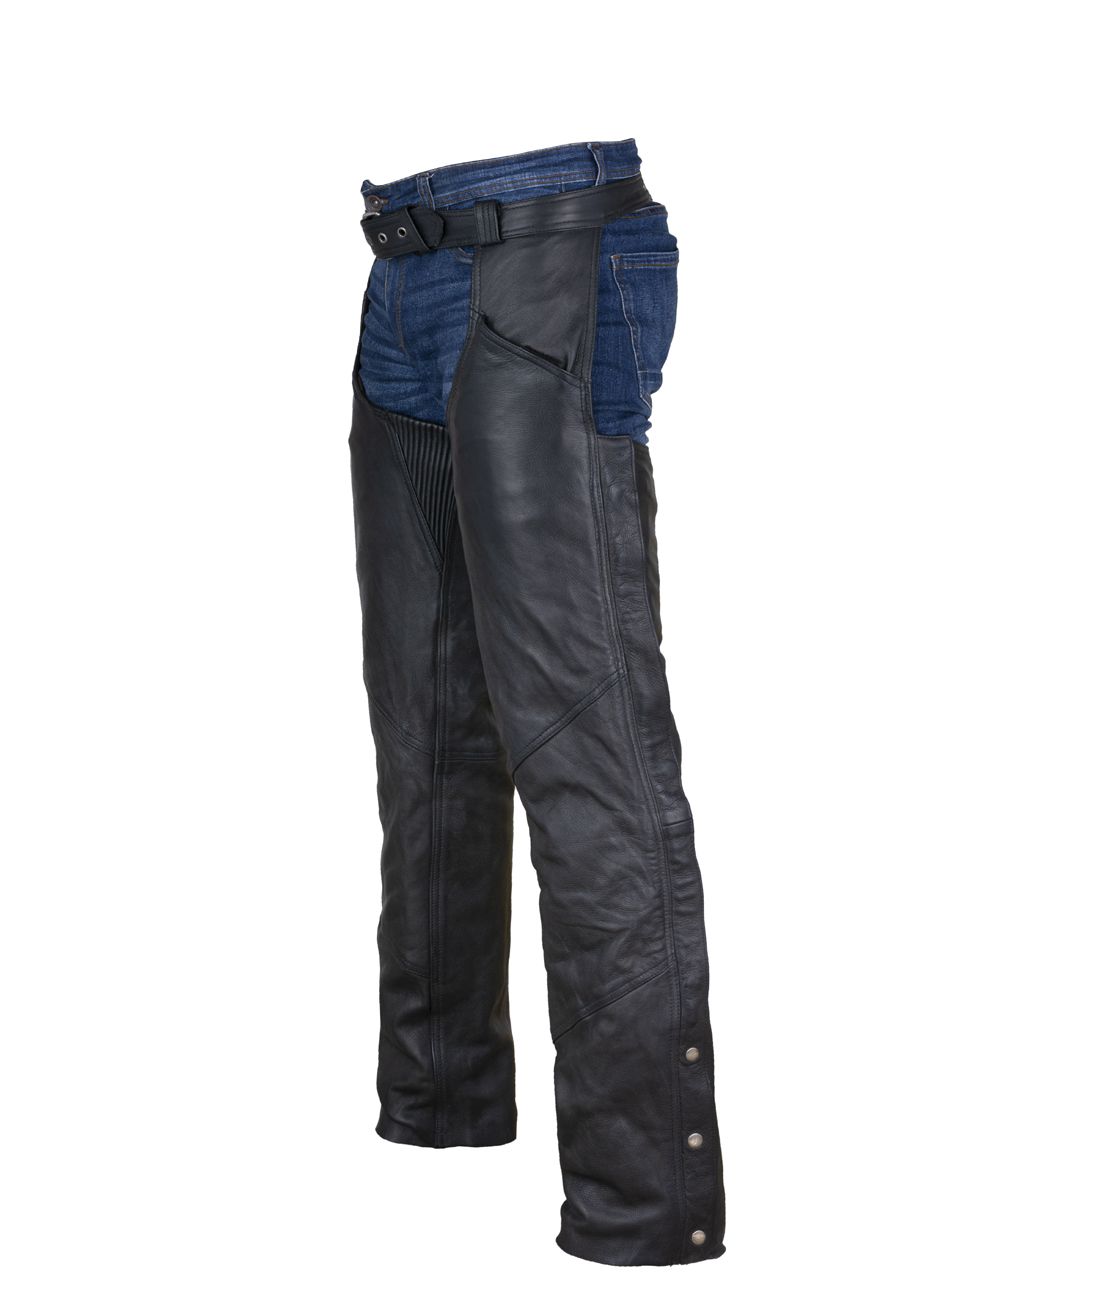 Heavy Duty Leather Motorcycle Chaps C4332-11 - Open Road Leather ...